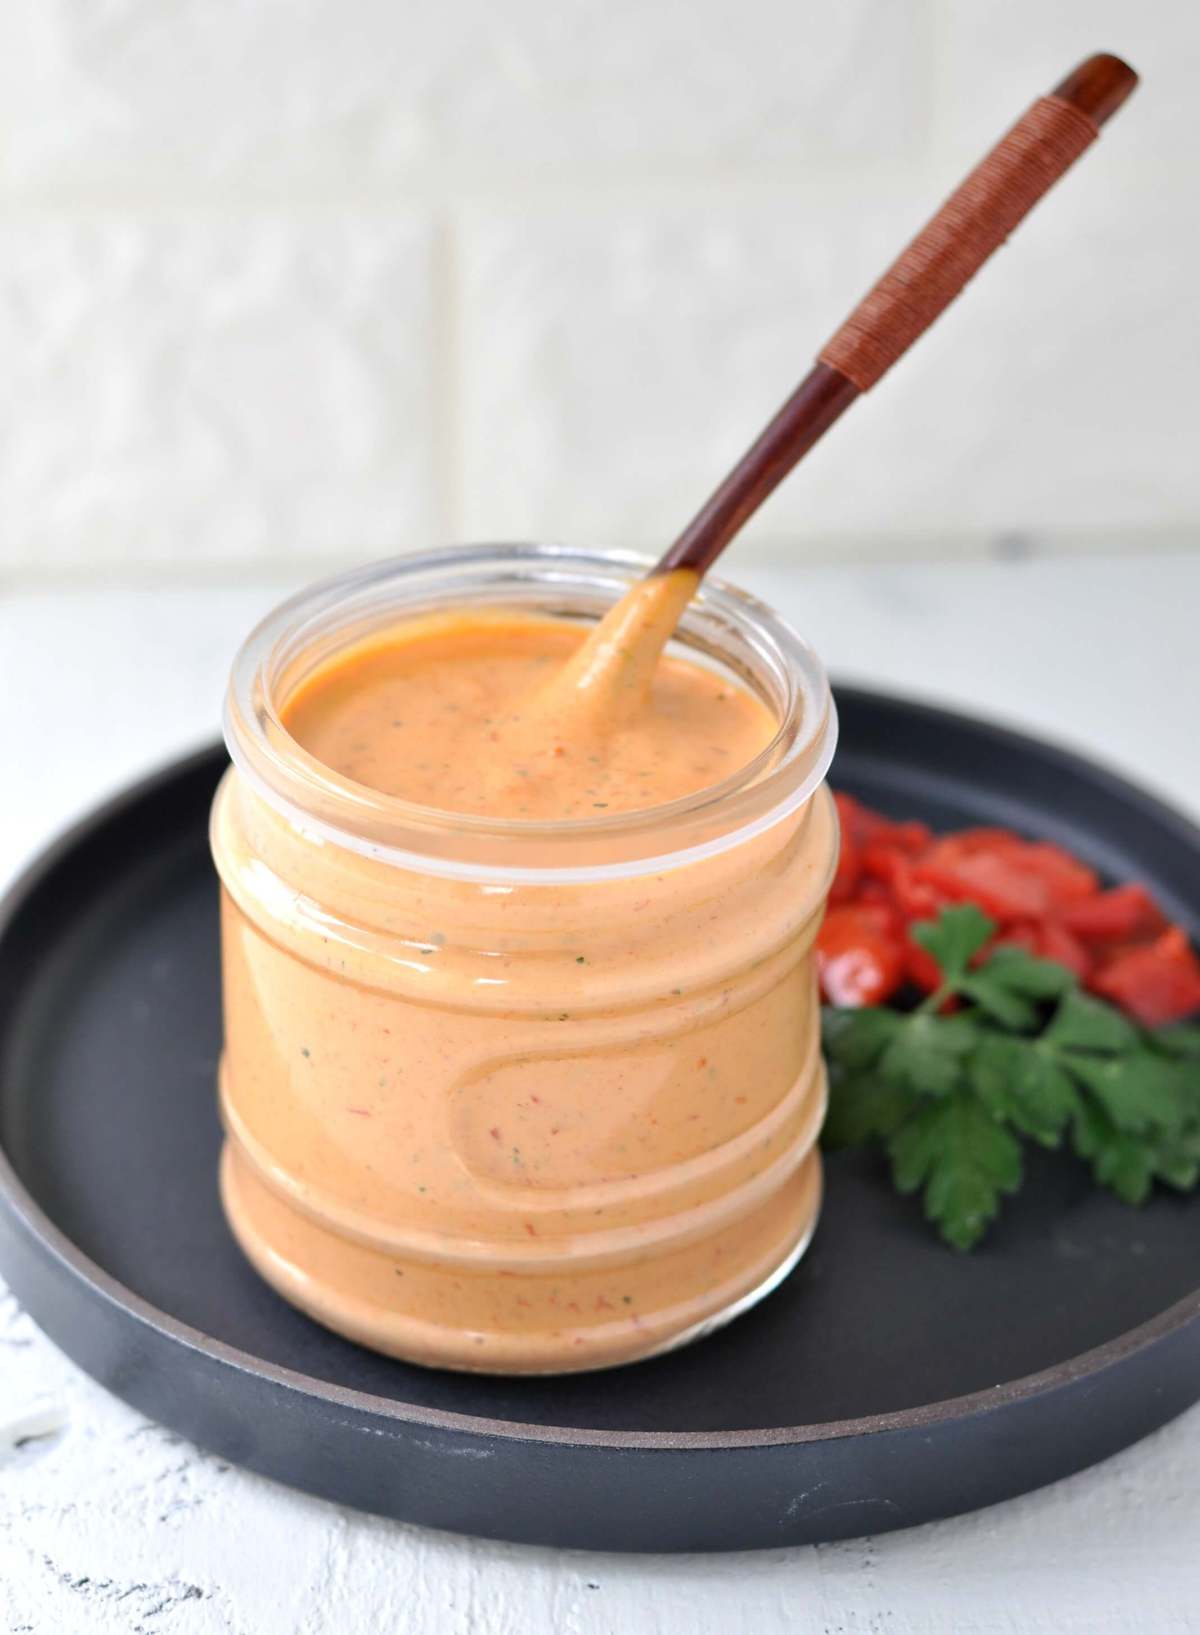 Roasted Red Pepper Garlic Aioli | Peace Love and Low Carb